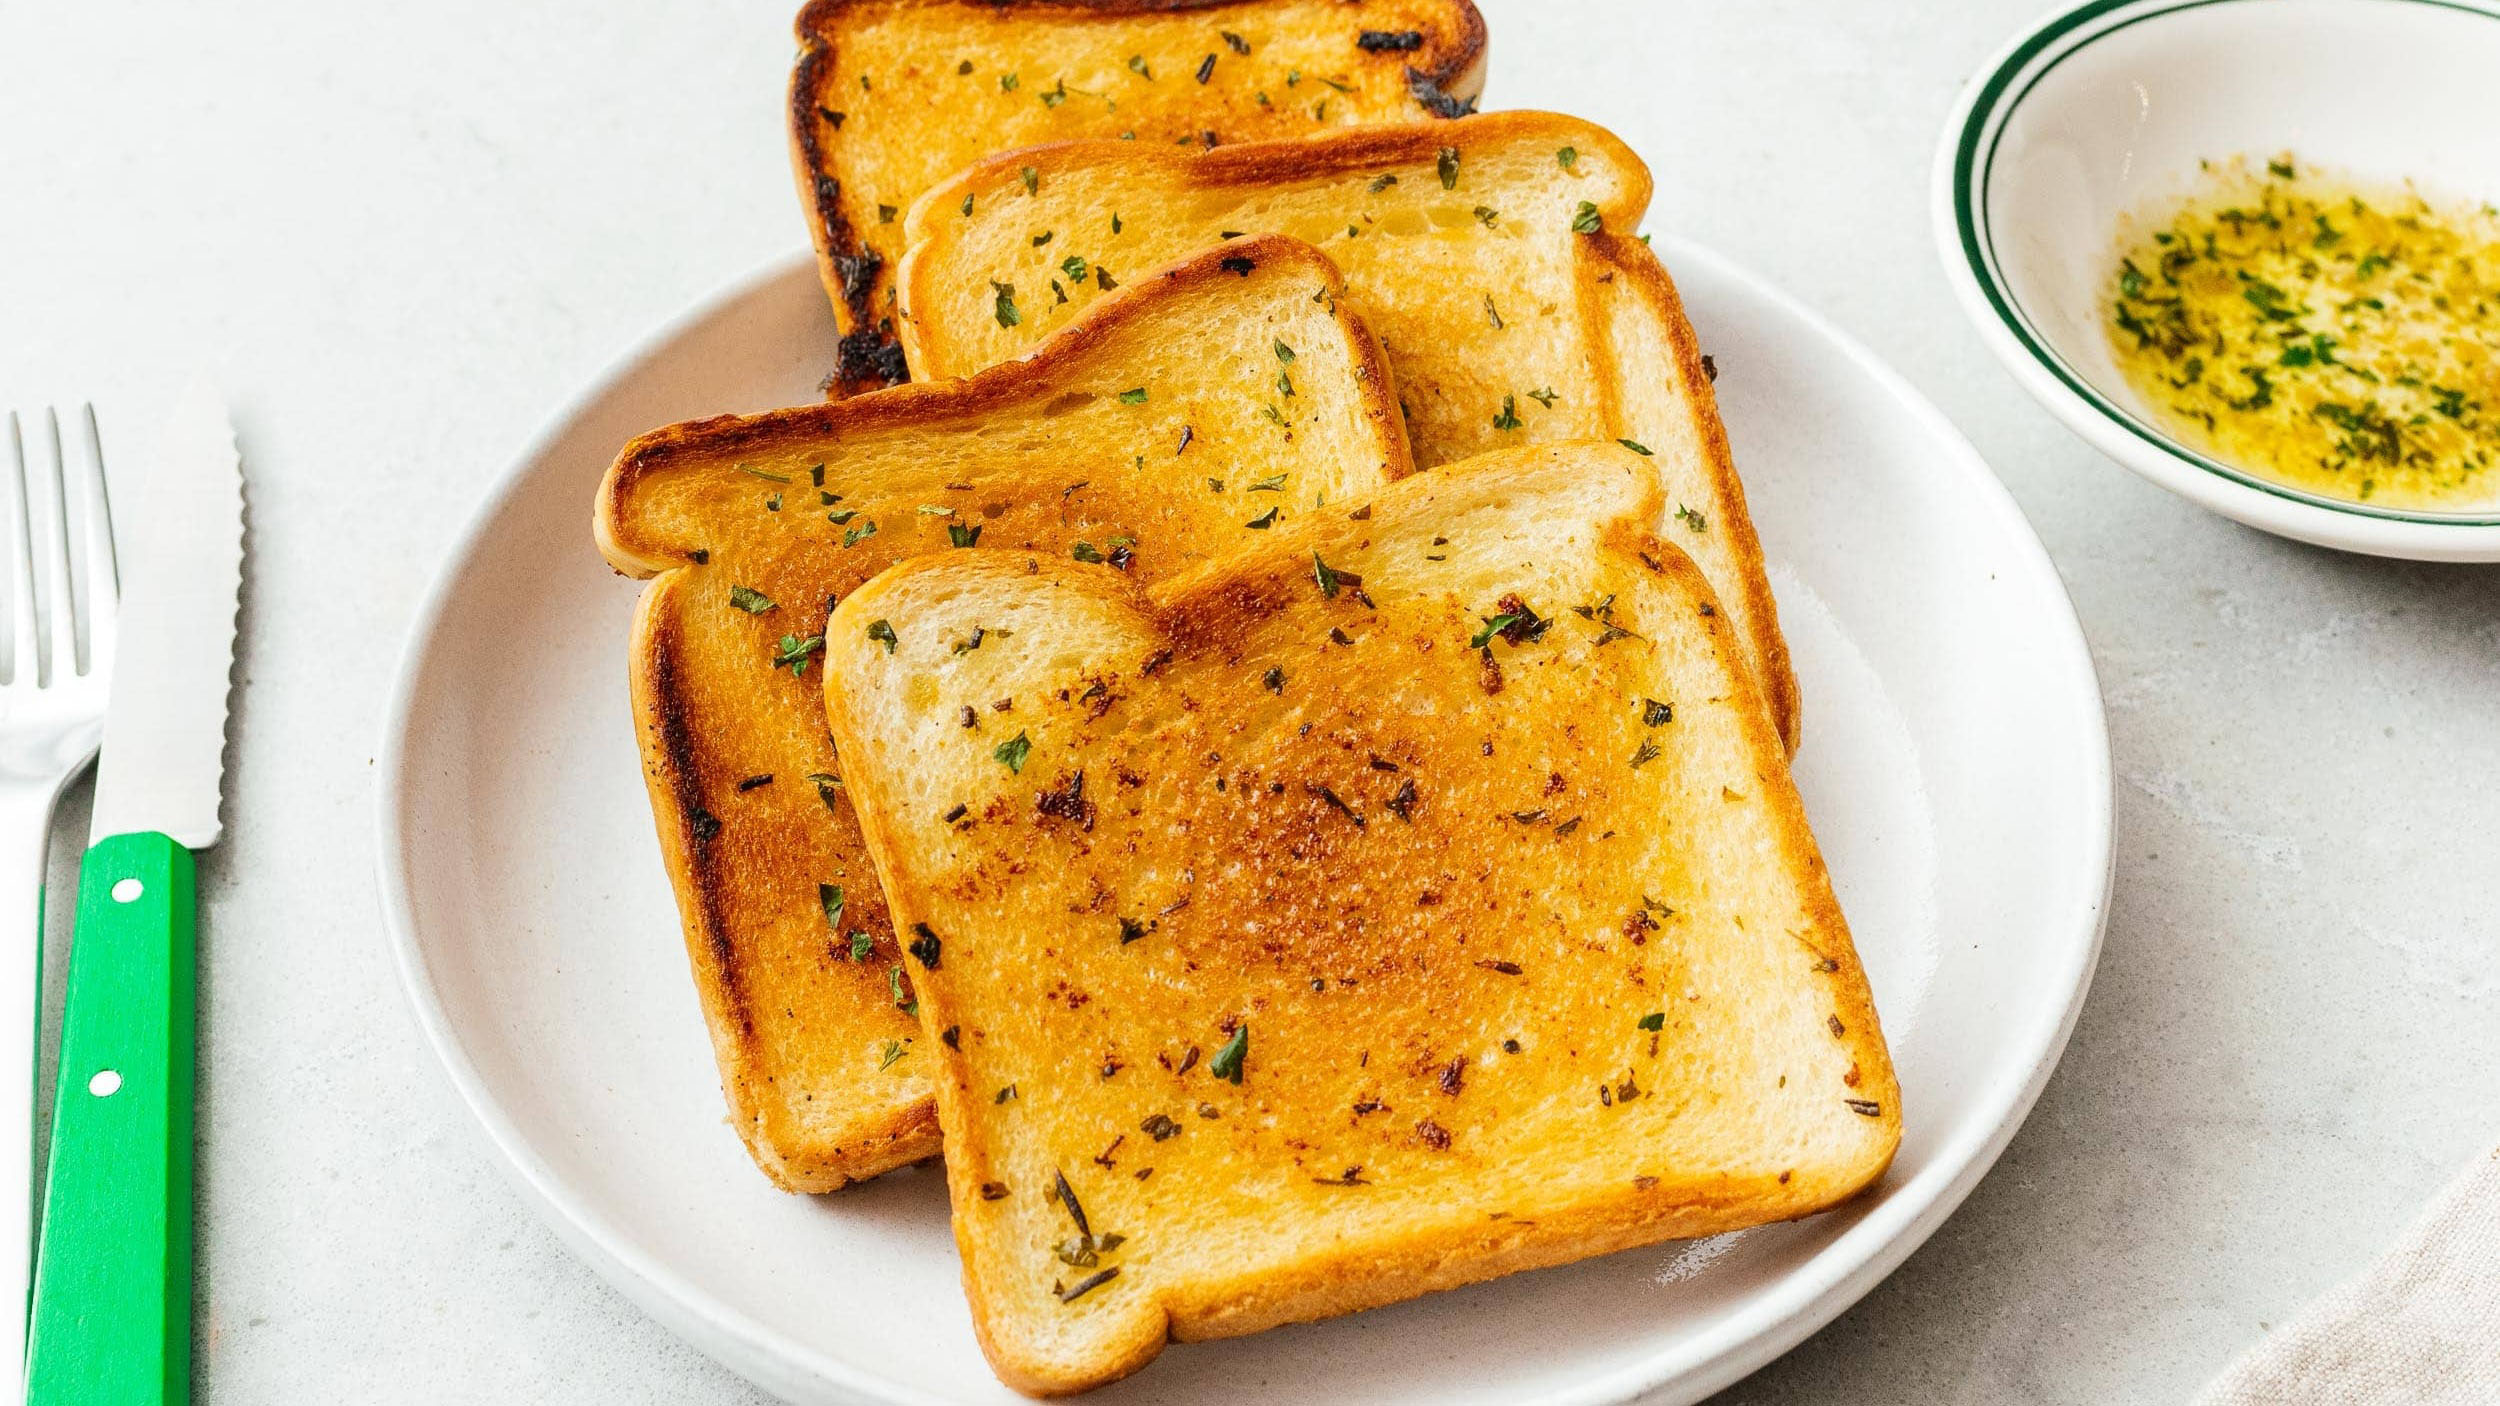 Texas toast is a toasted bread that is typically made from sliced bread that has been sliced at double the usual thickness of packaged bread. Texas to...